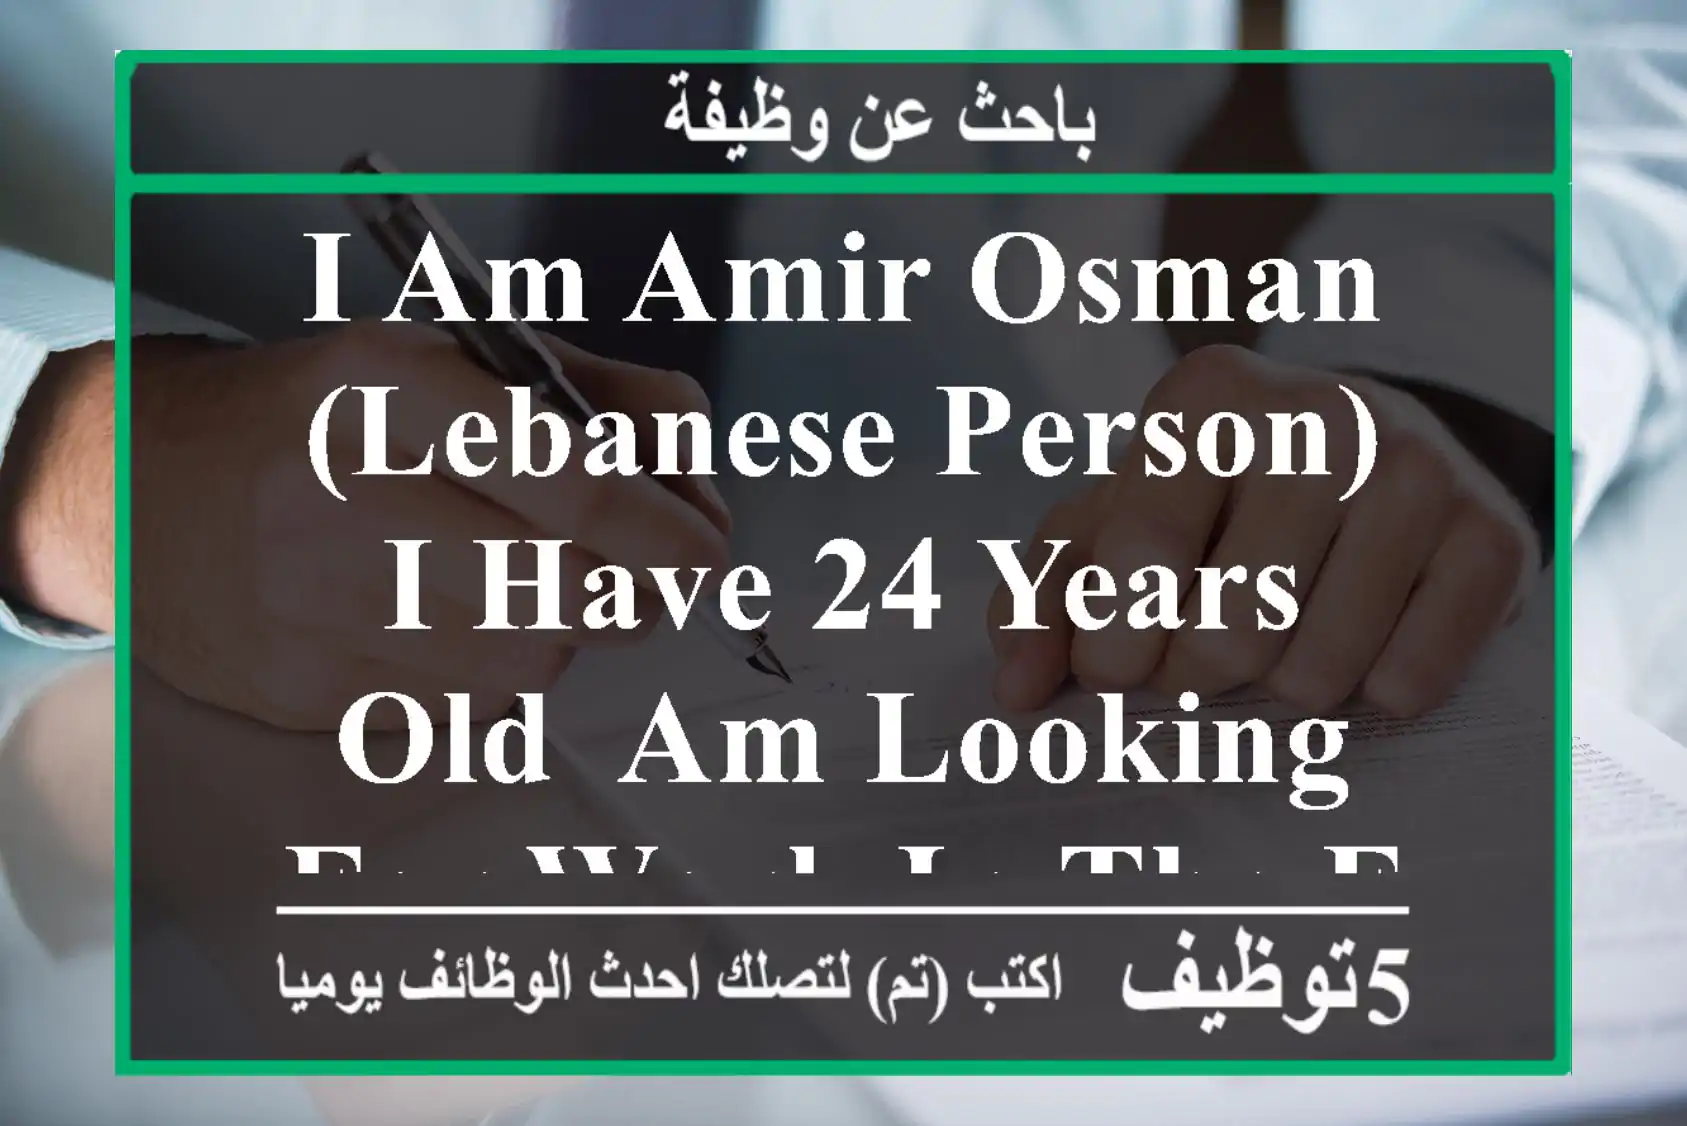 i am amir osman (lebanese person) i have 24 years old, am looking for work in the field of ...